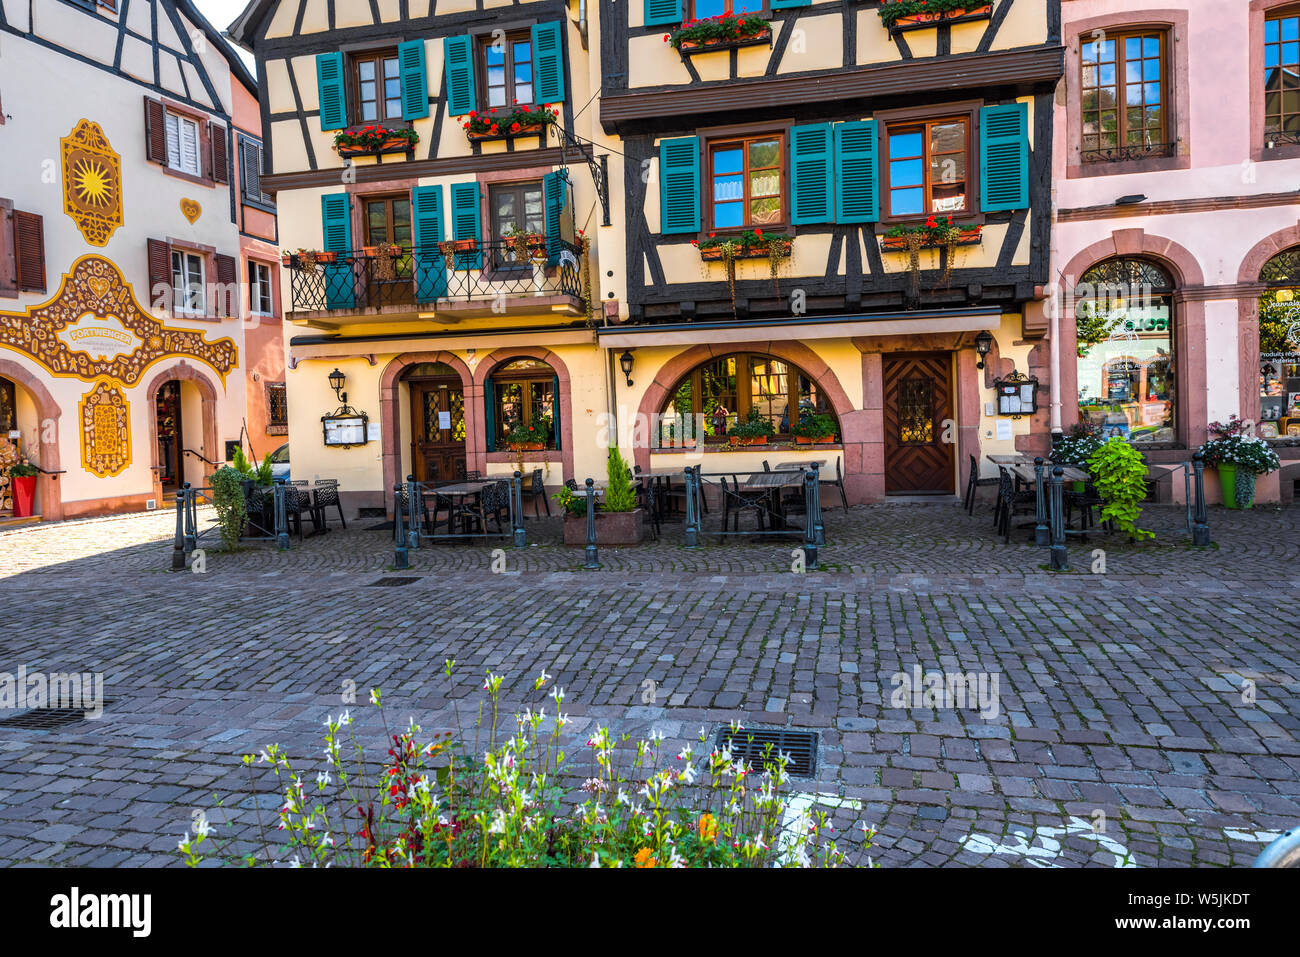 colorful half-timbered houses in Kaysersberg, Alsace Wine Route, France, picturesque old town and touristy destination Stock Photo